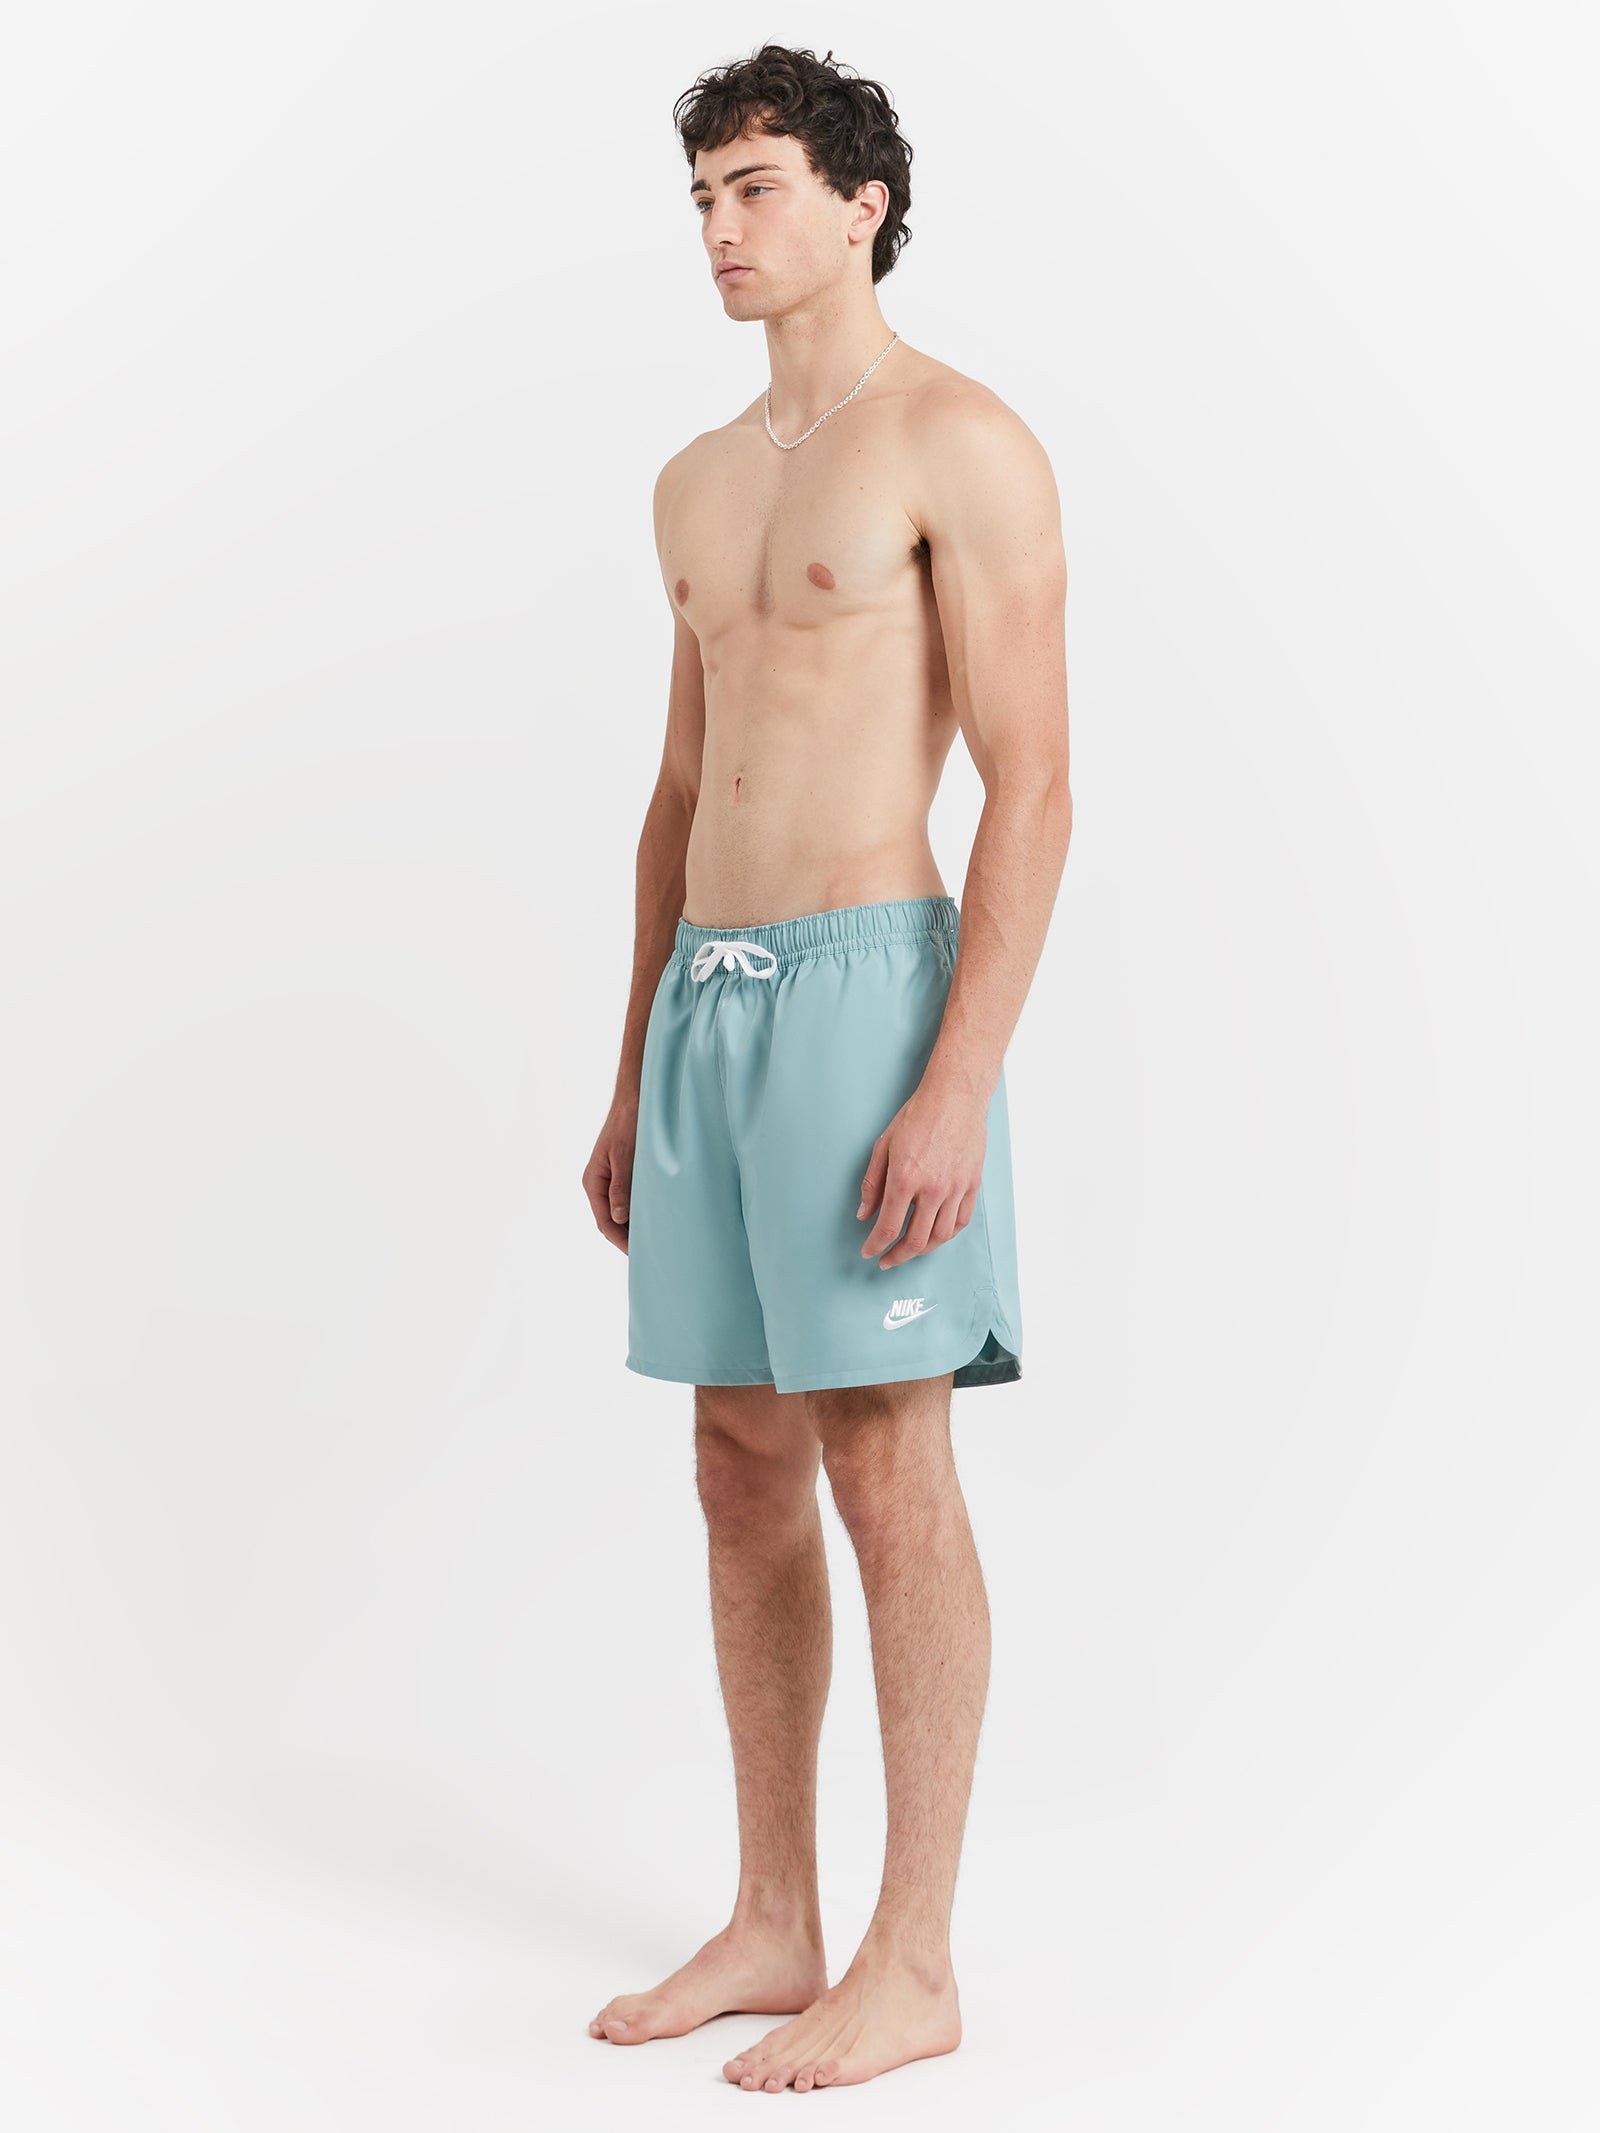 Nike Woven Lined Flow Shorts - Black